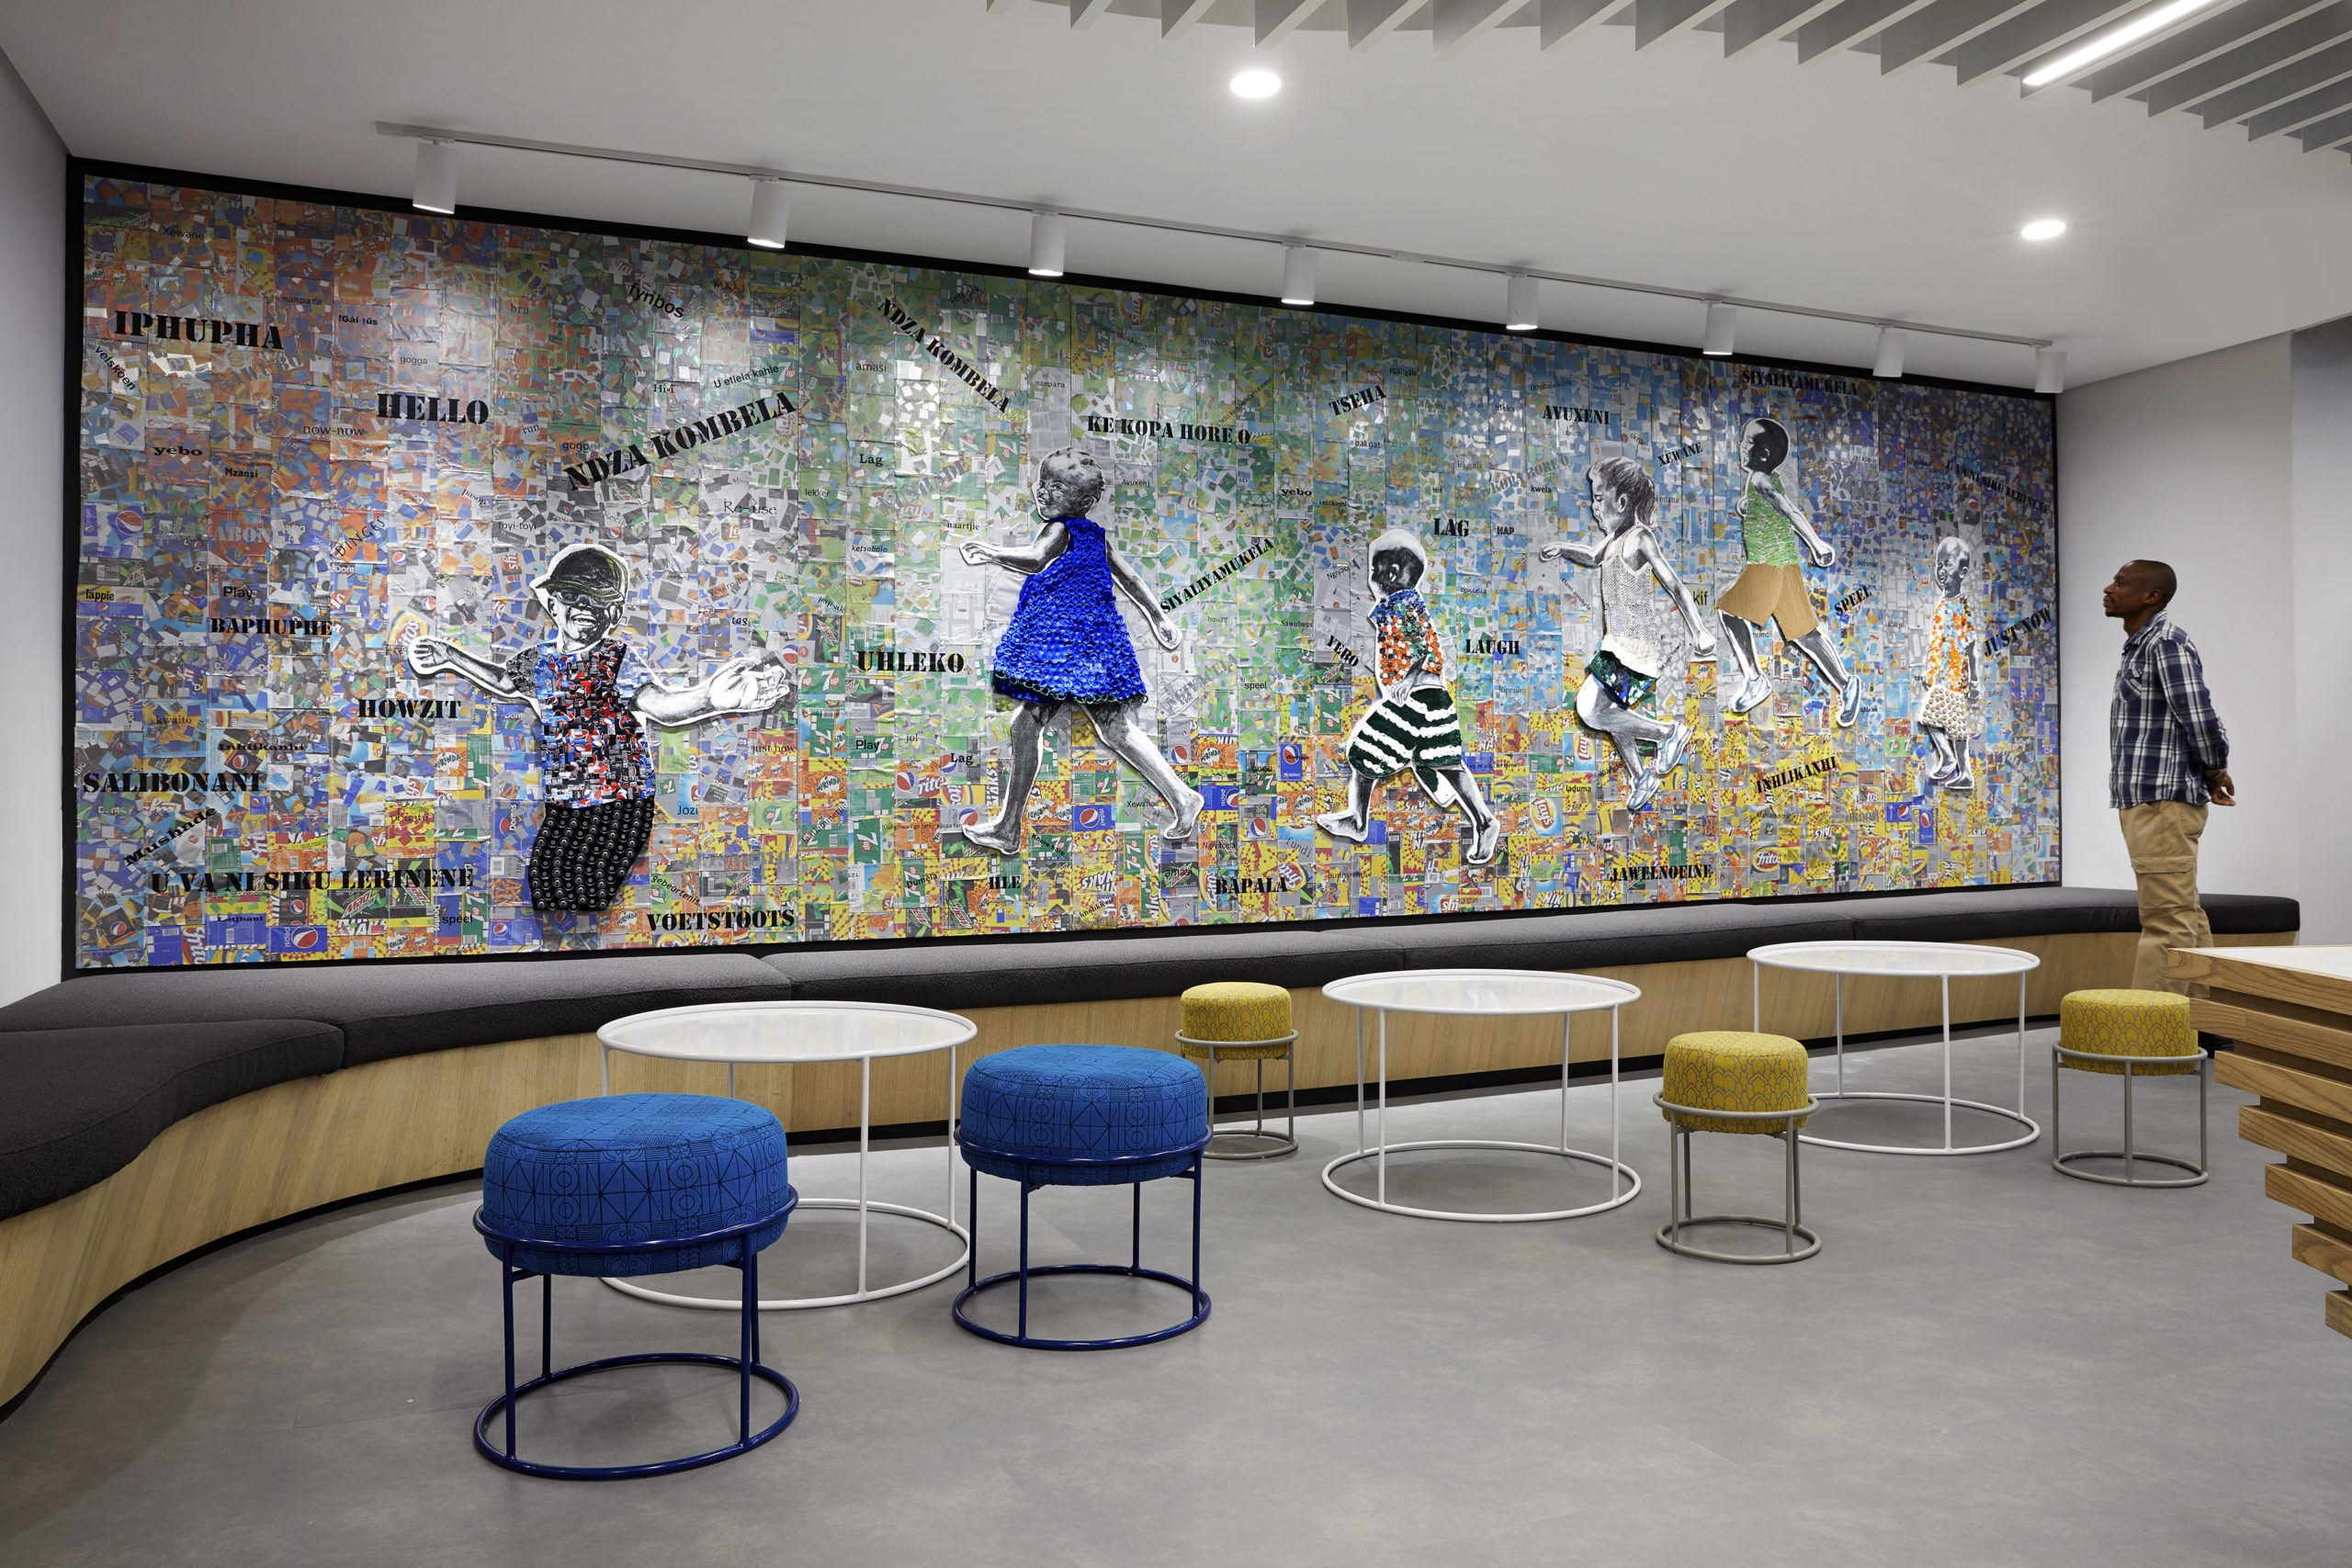 Mixed media mural title ‘You’re It!’ by Vera Schmidt at PepsiCo’s Johannesburg offices in South Africa